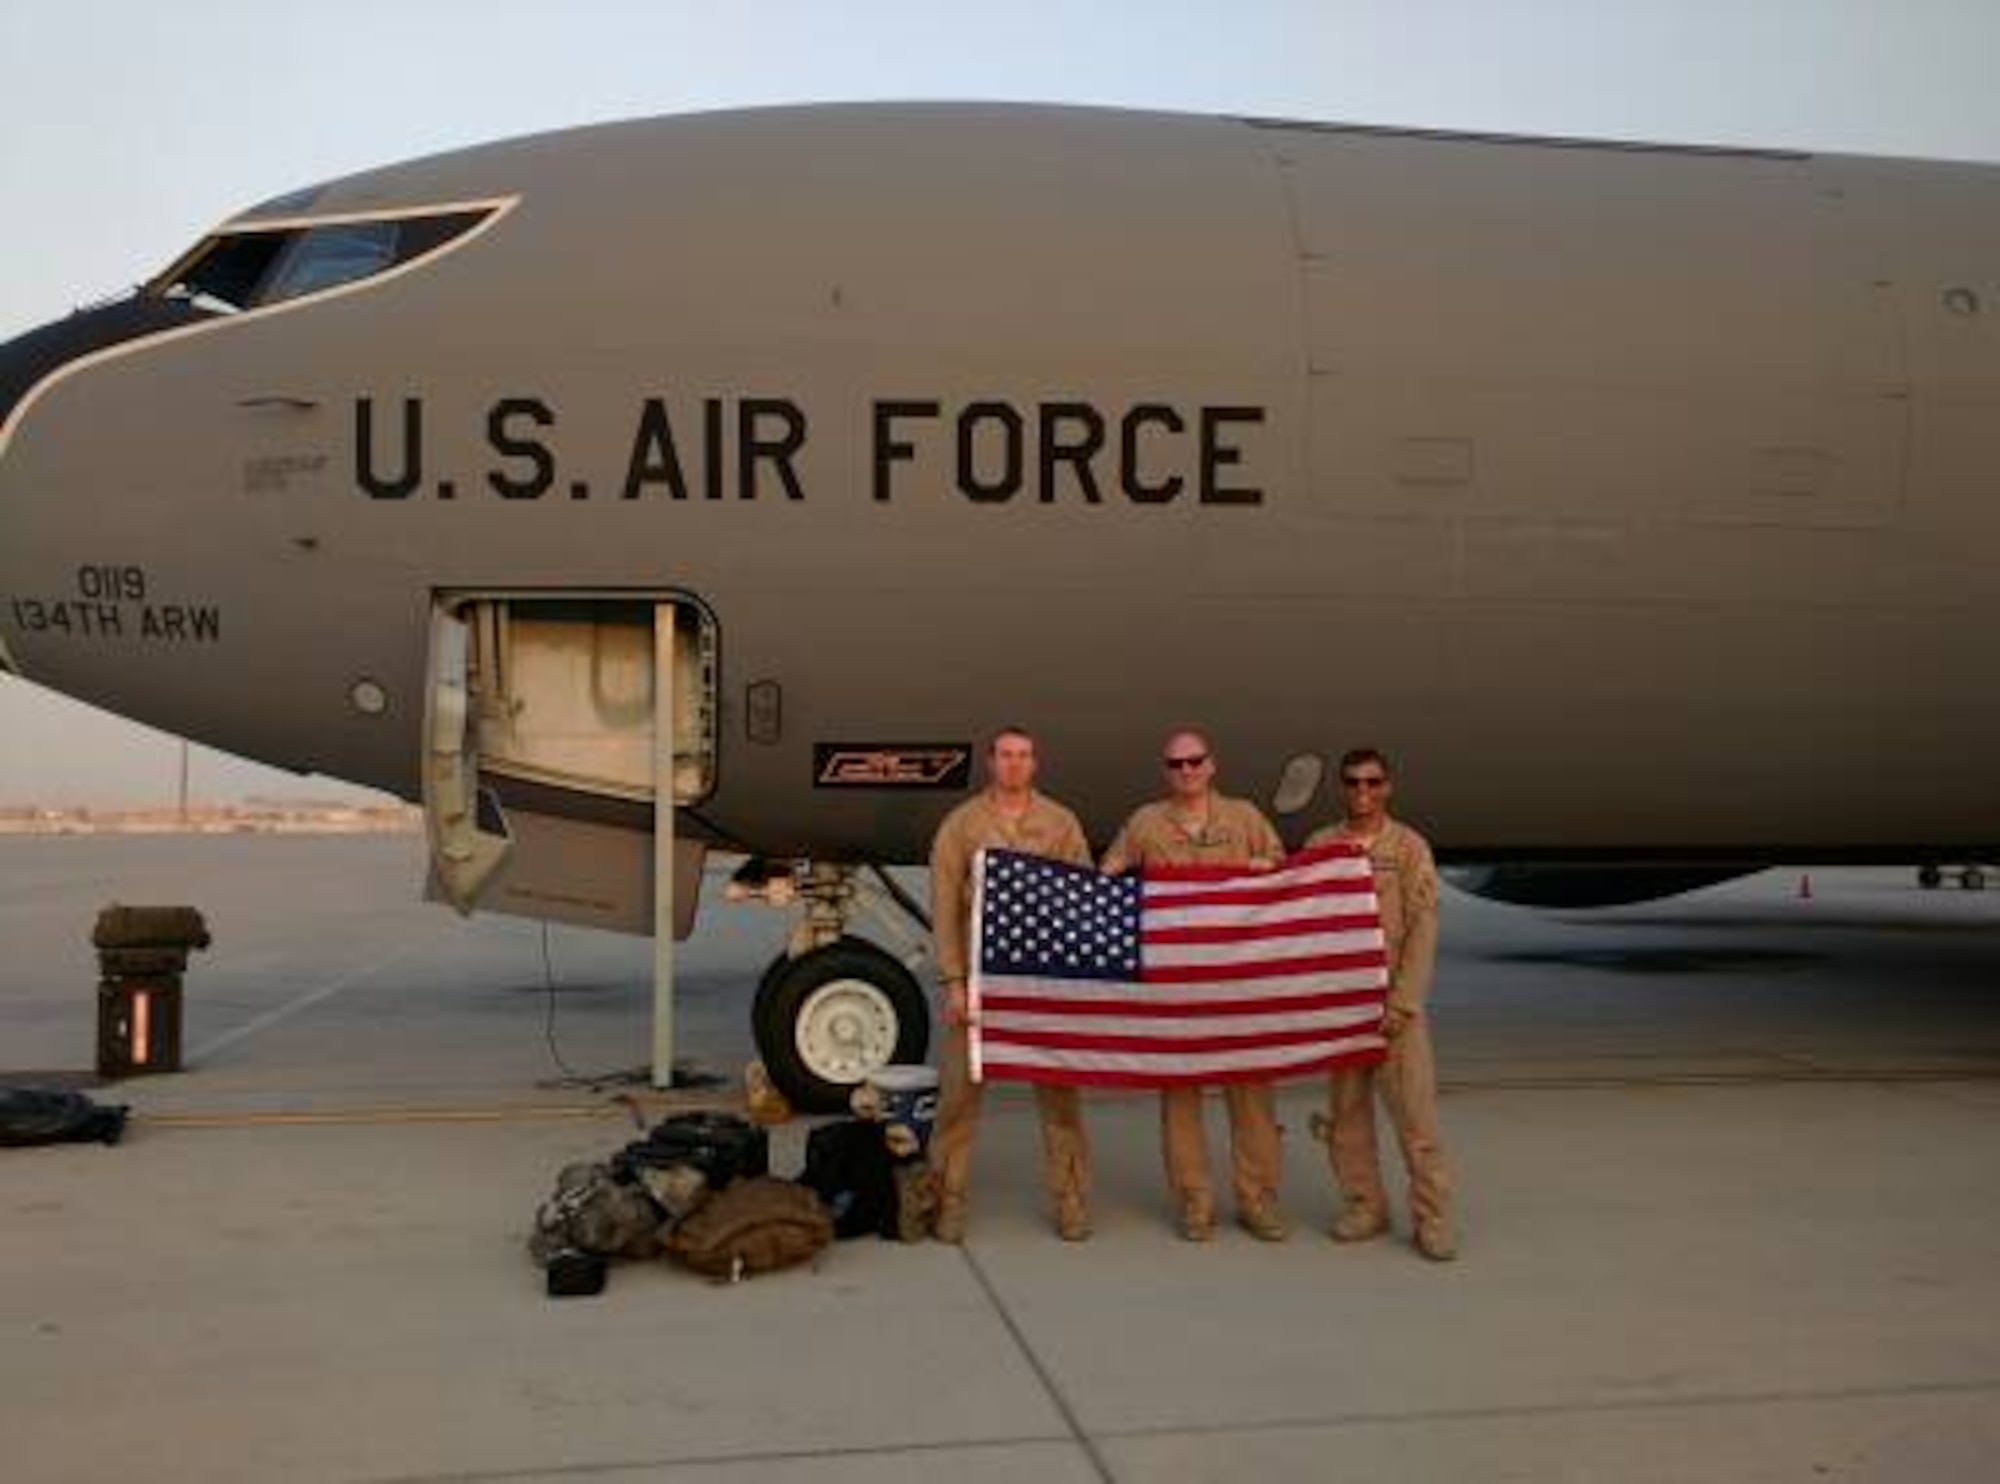 Senior Airman Jonathan Nigl, left, a 384th Air Refueling Squadron boom operator, Maj. Robert Bradley and Capt. Nathanial Beer, both 384th ARS pilots, pose for a photo in front of their aircraft. (Courtesy photo)